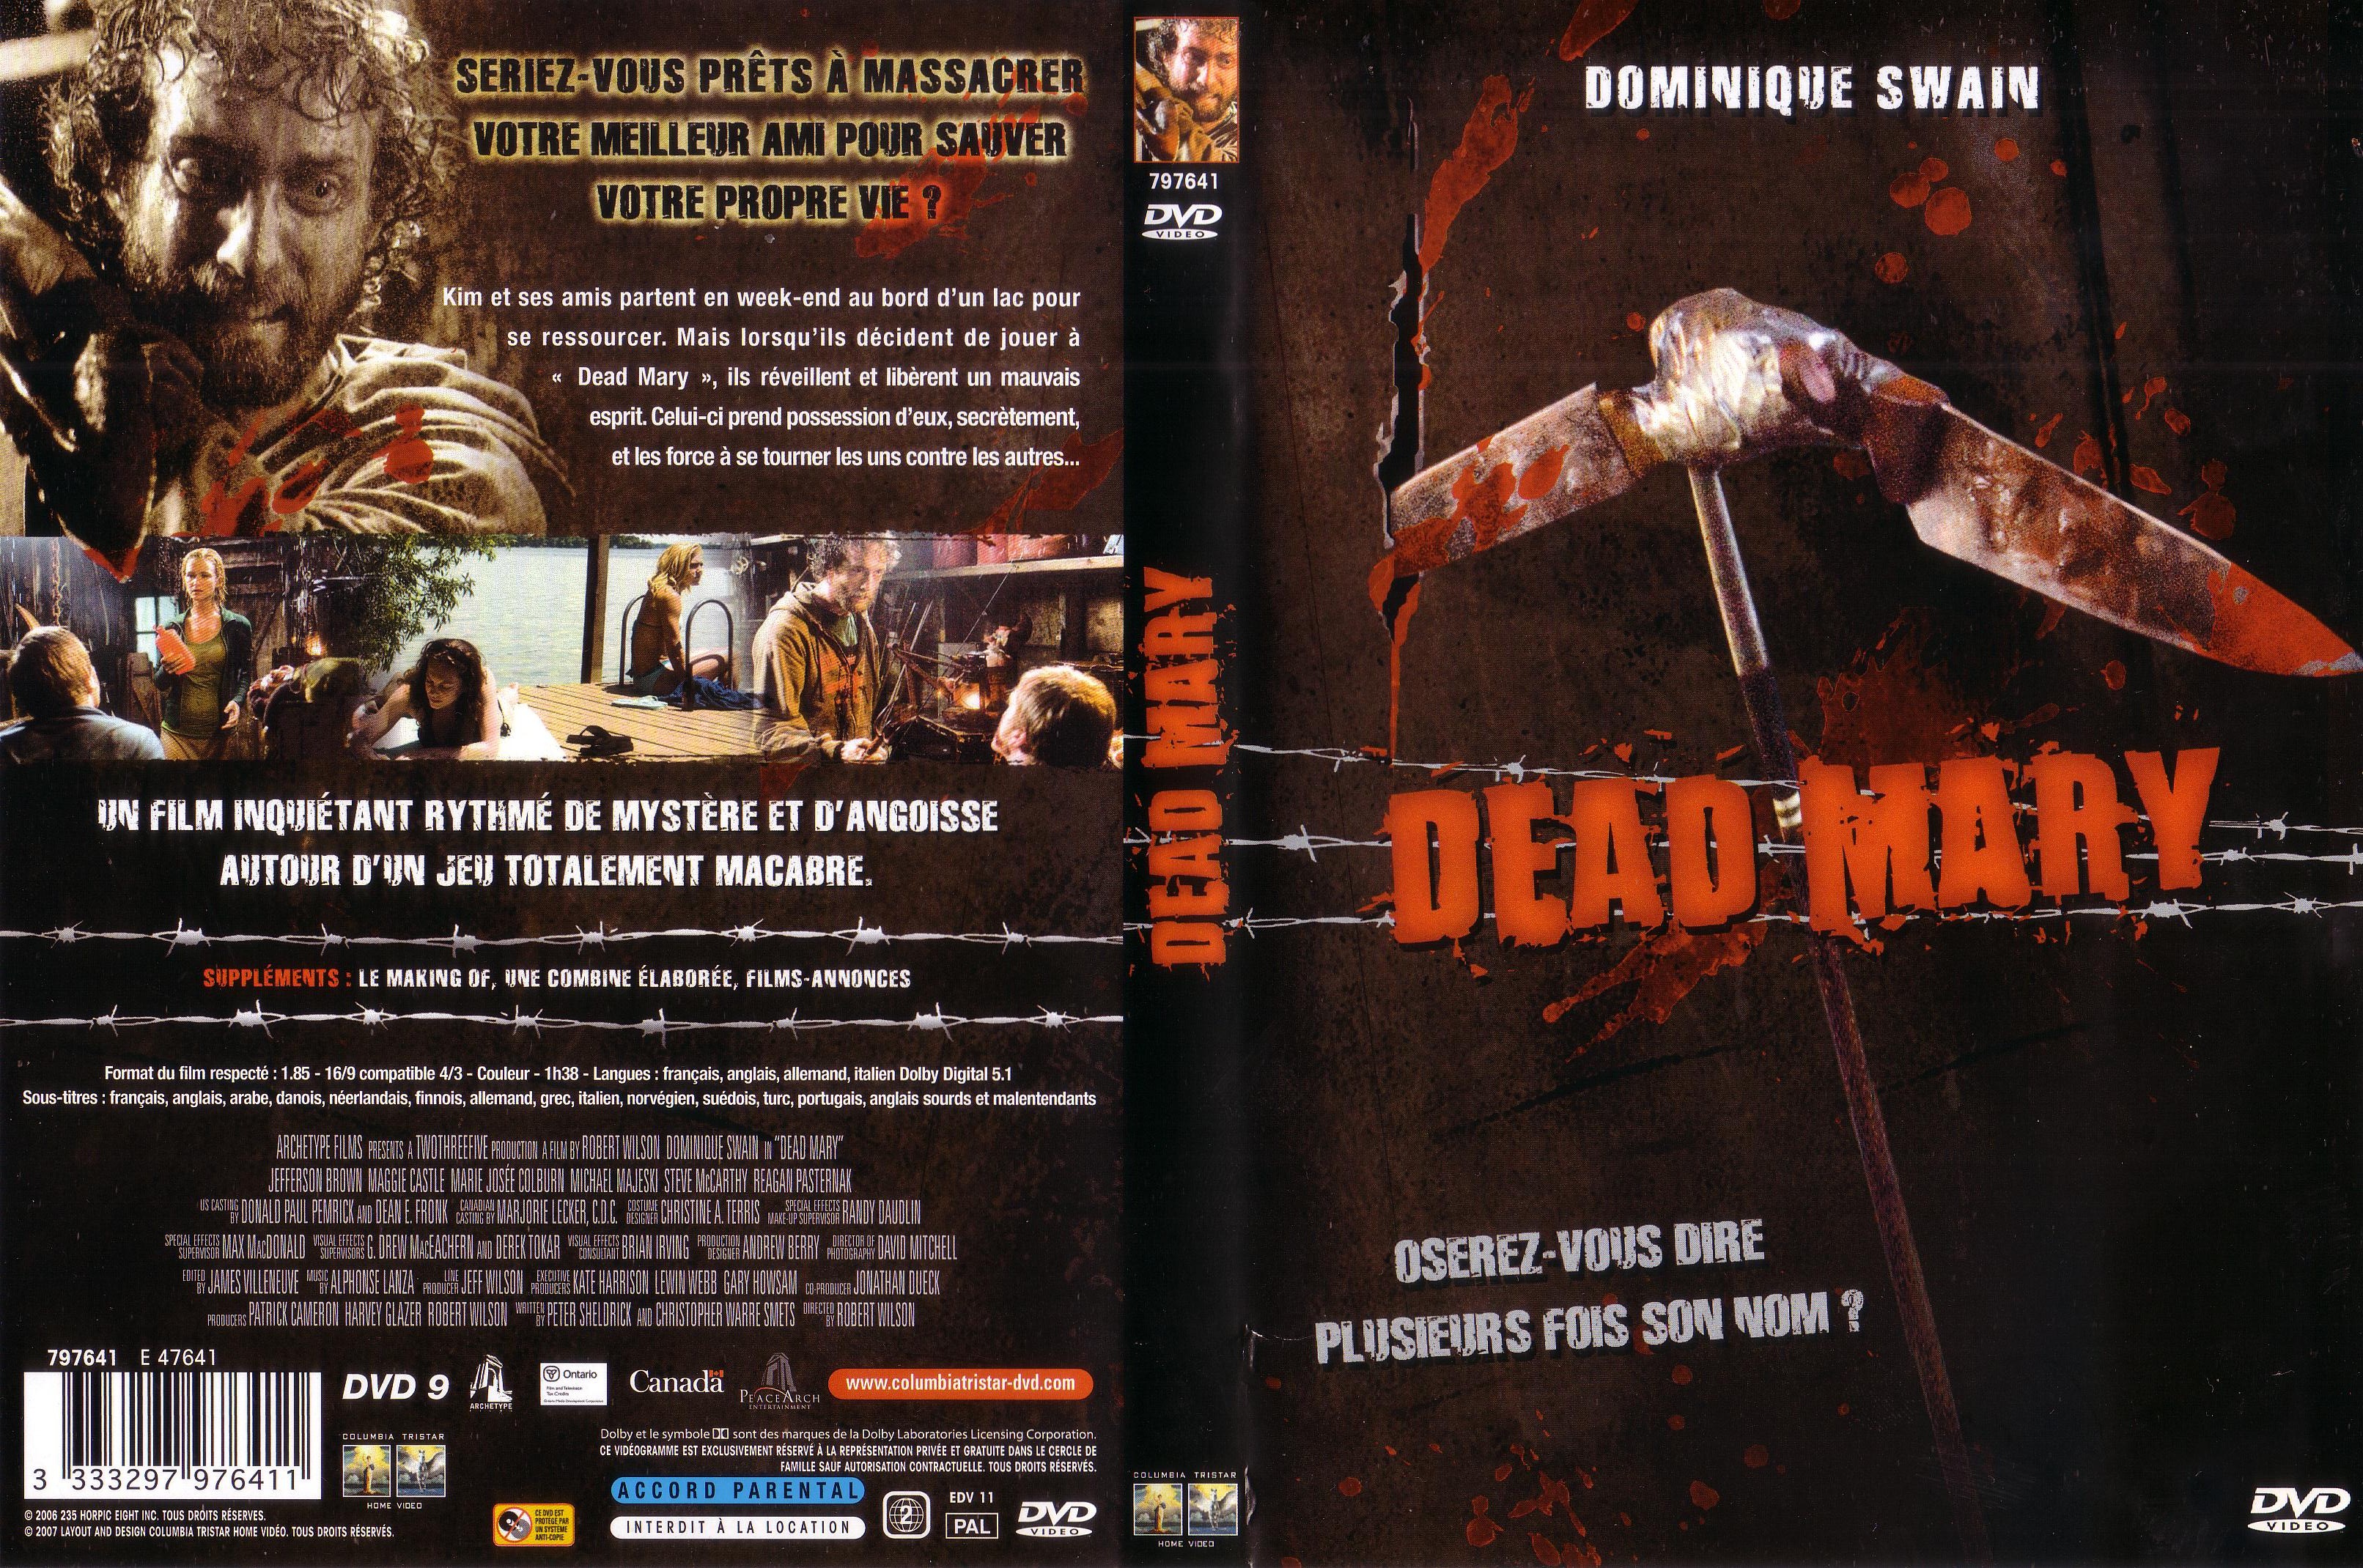 Jaquette DVD Dead mary v2